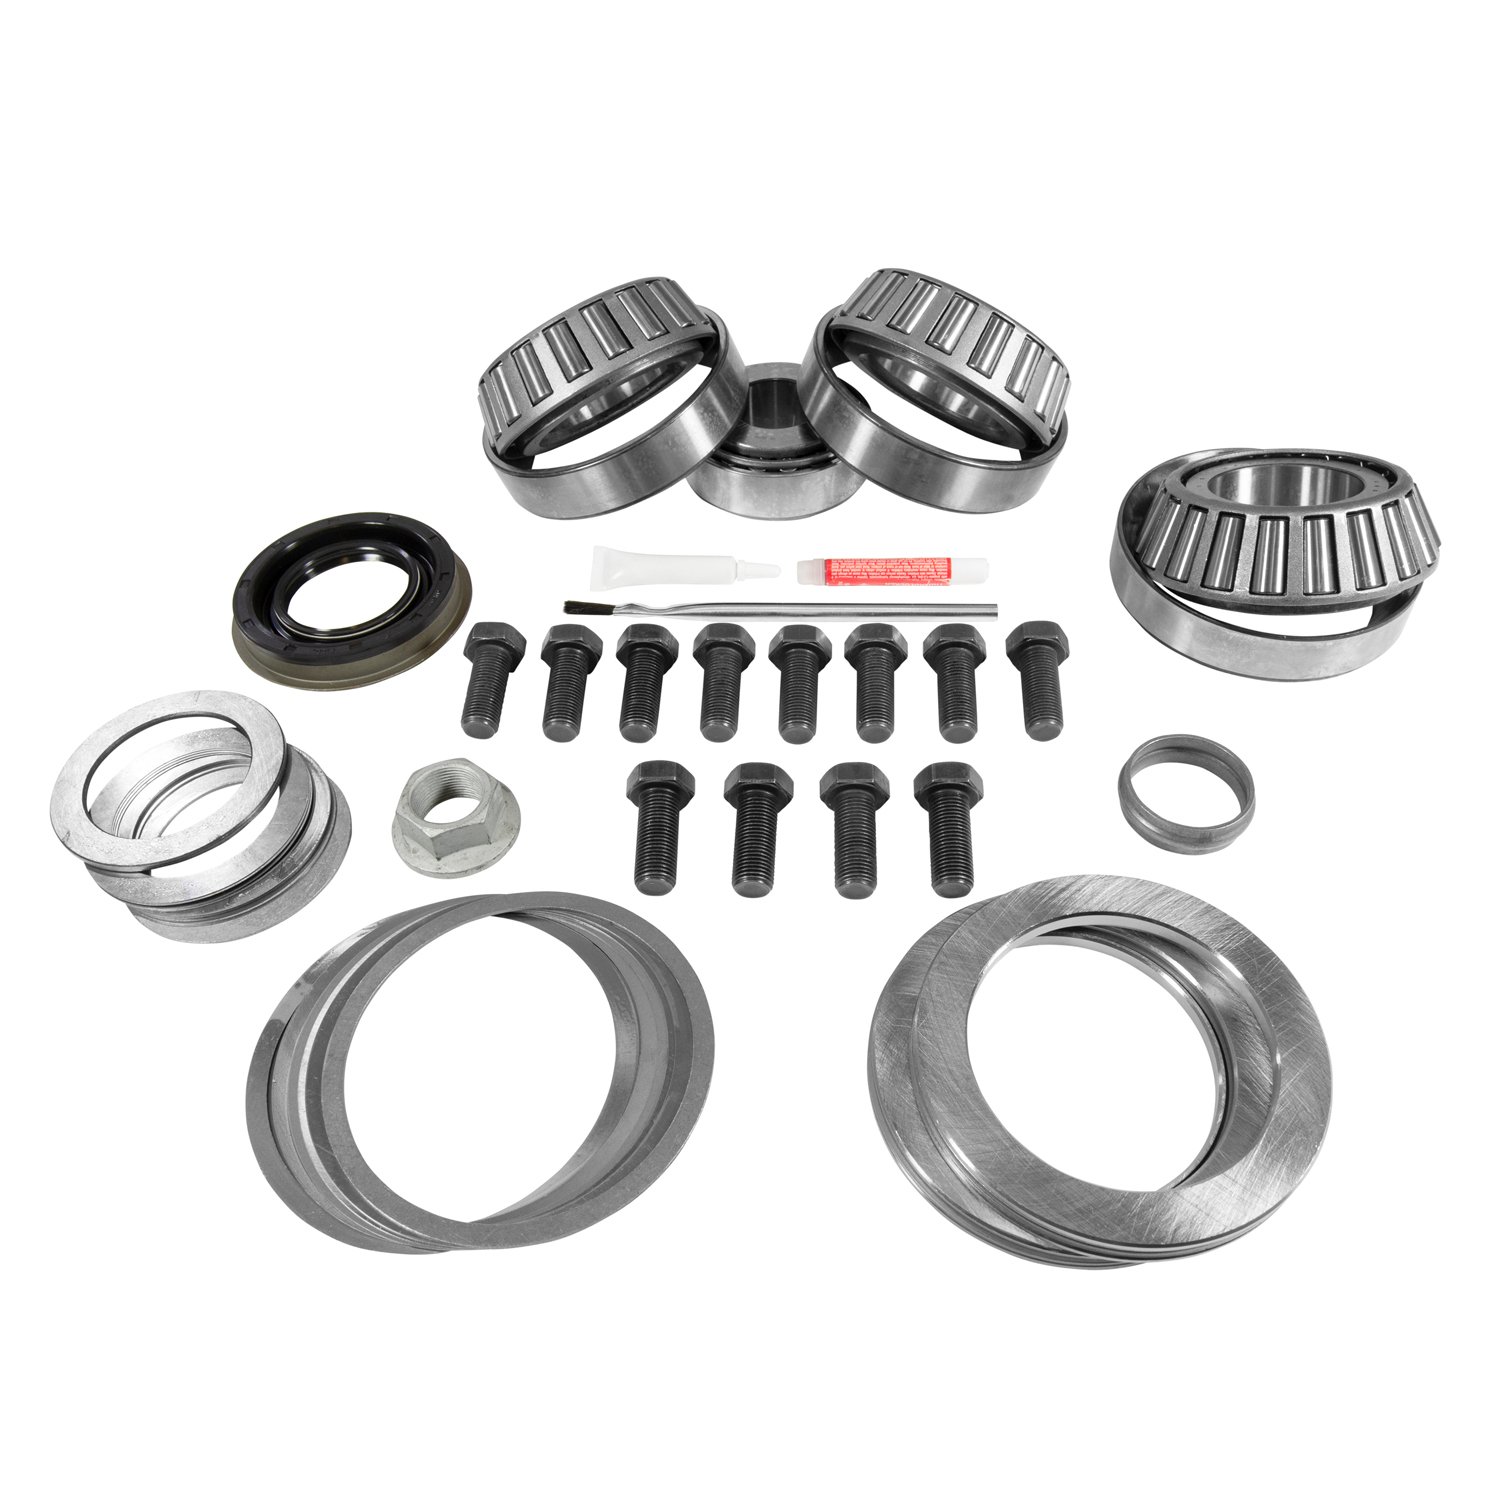 USA Standard ZK F10.5-B Master Overhaul Kit, 2008-2010 Ford 10.5 in. W/Aftermarket 10.25 in. R&P